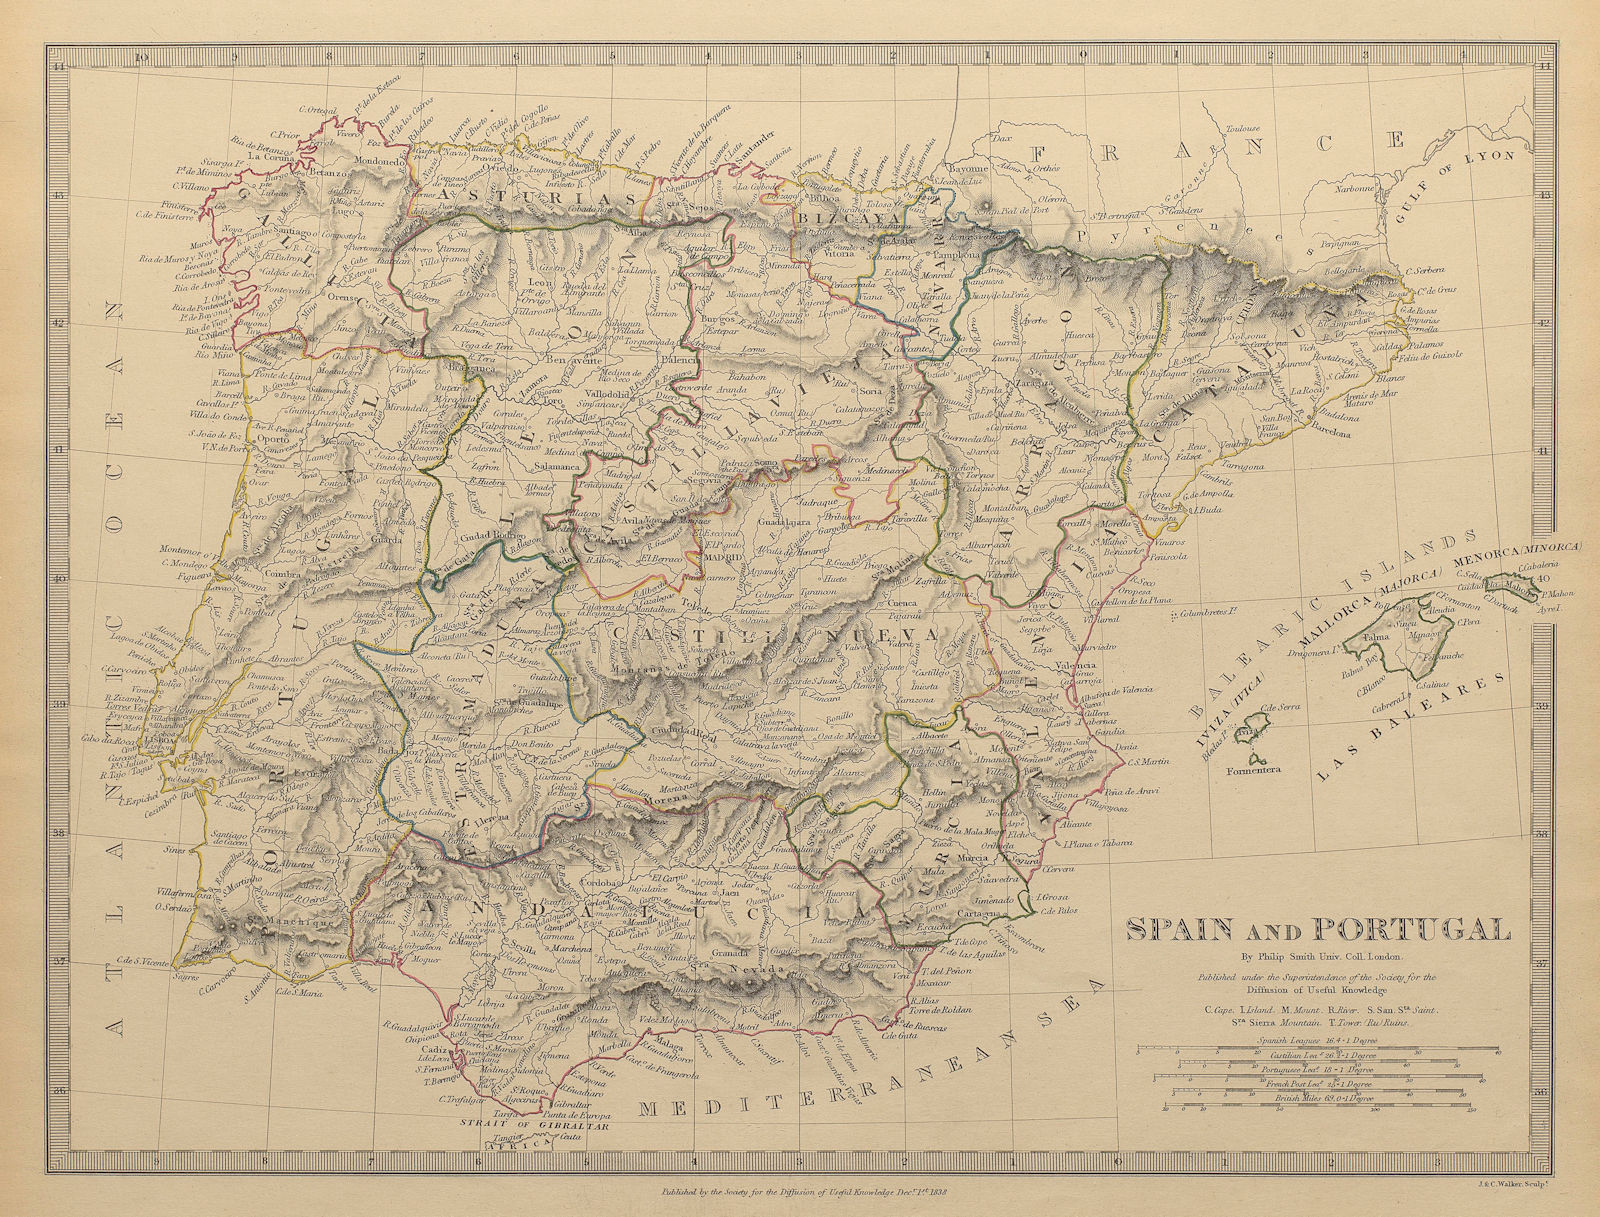 Associate Product IBERIA. Spain and Portugal showing provinces. SDUK 1844 old antique map chart